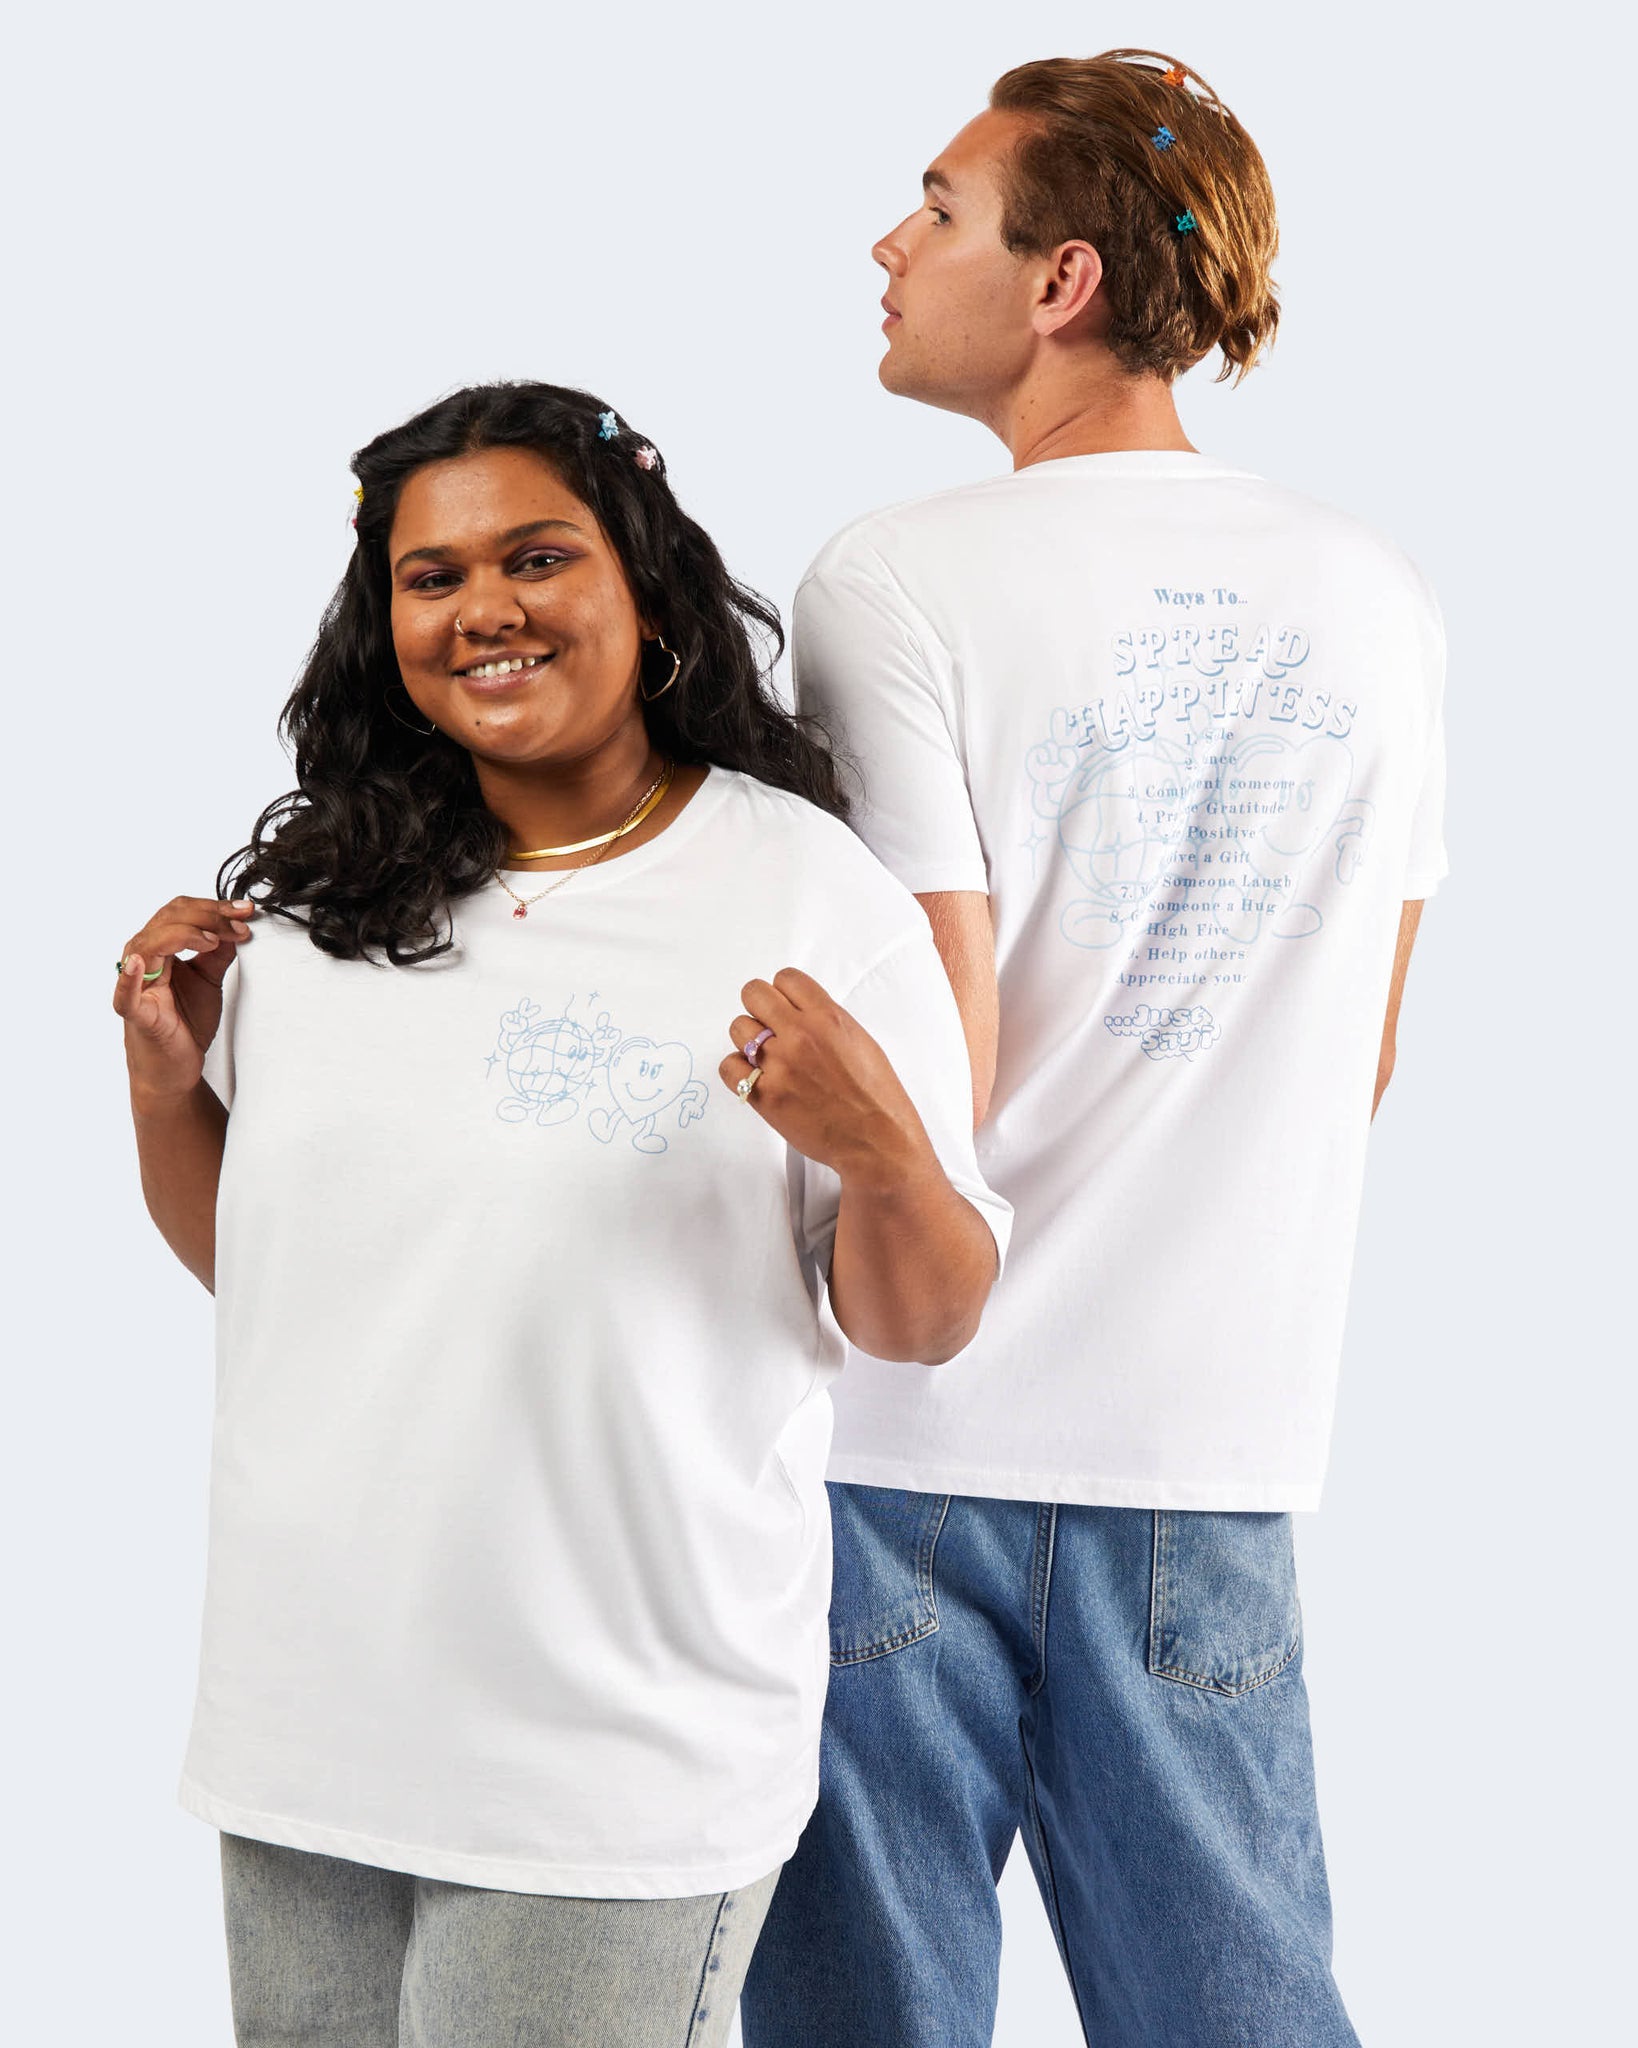 Ways To Spread Happiness Tee - Blue